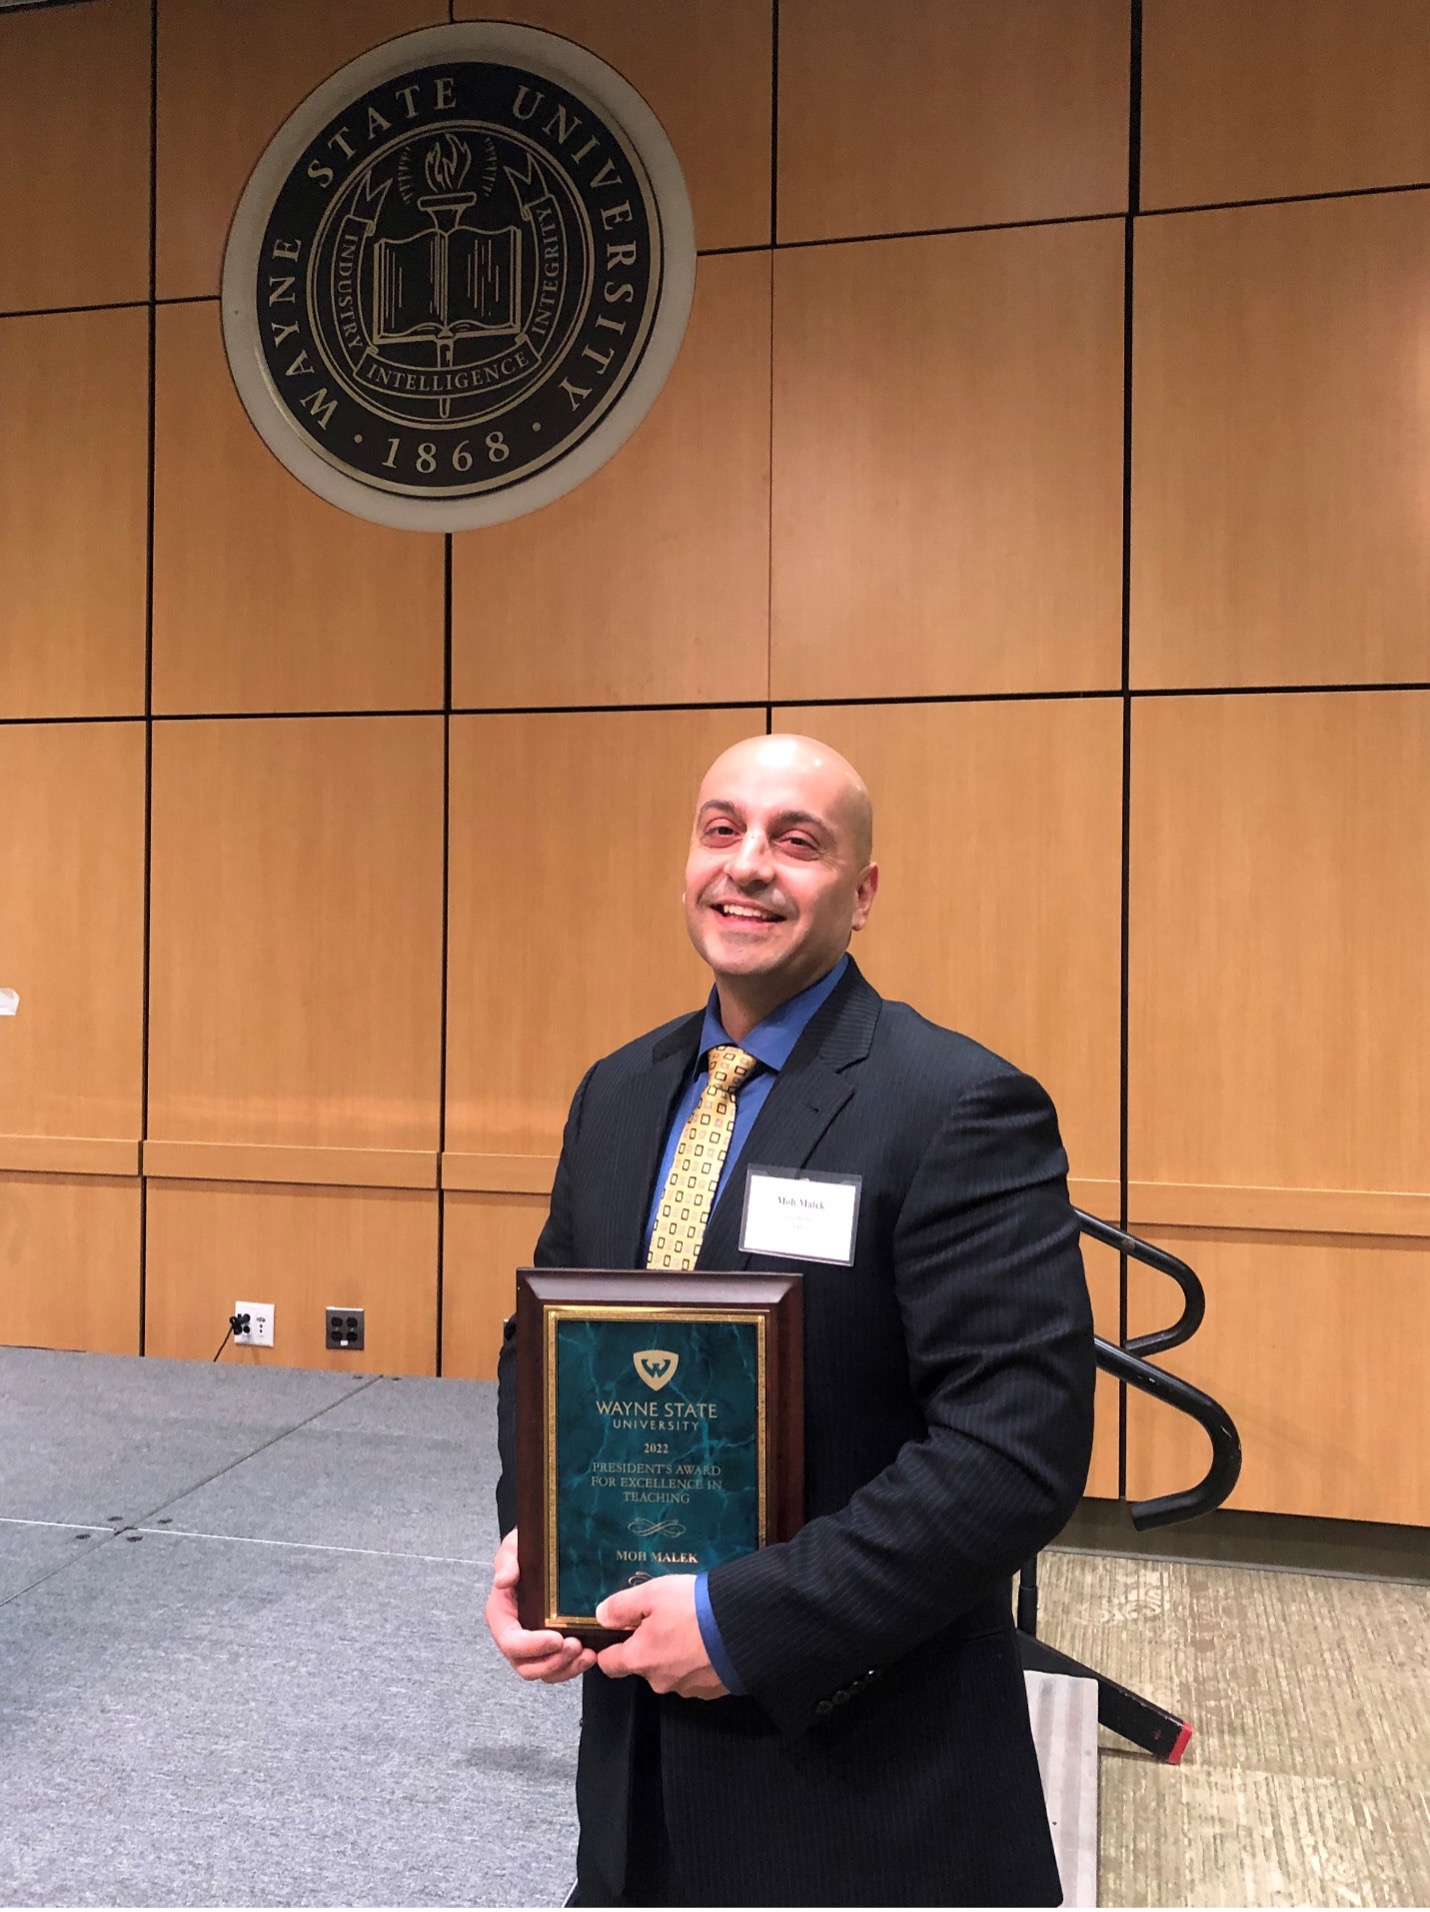 Wayne State Prof. Moh Malek with his award plaque